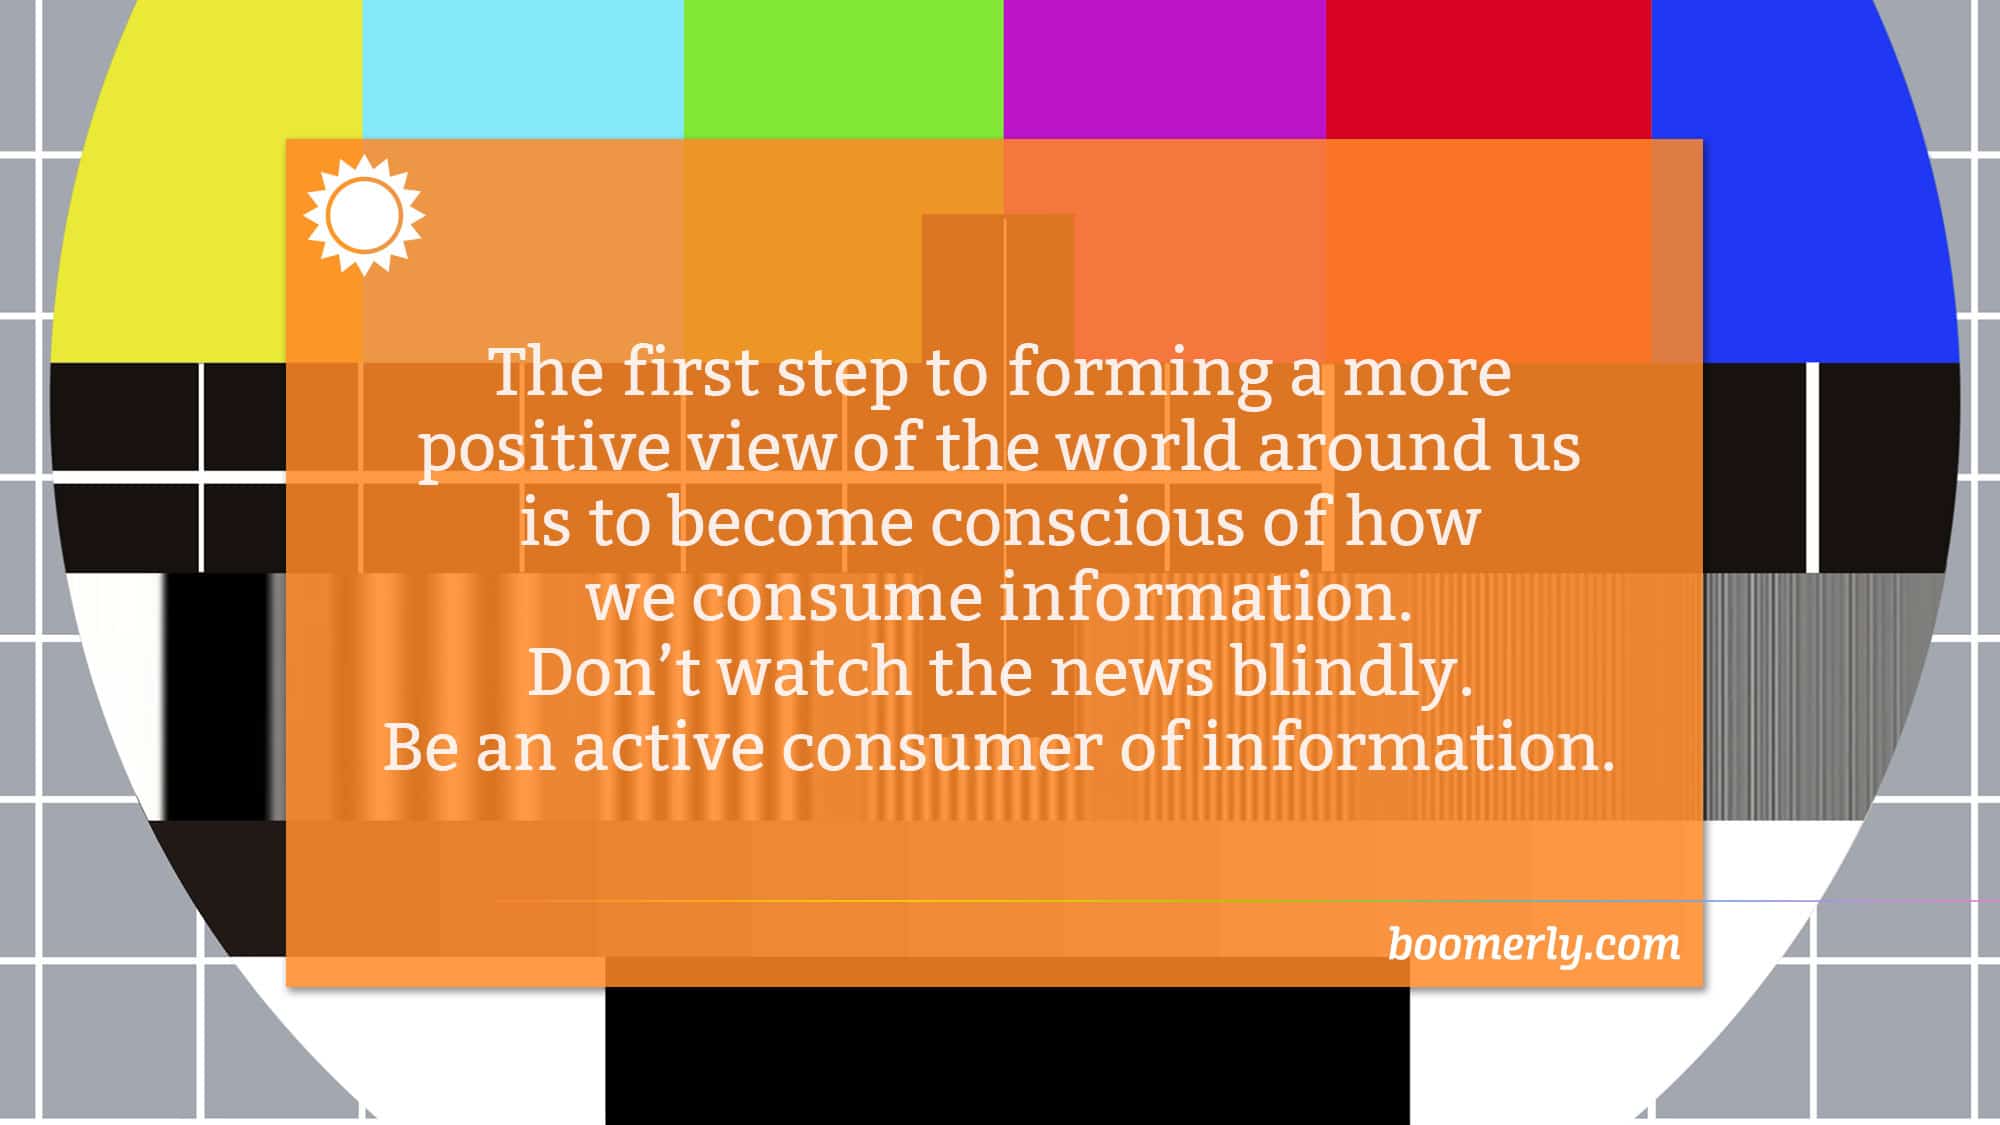 Boomerly.com - The first step to forming a more positive view of the world around us is to become conscious of how we consume information. Don’t watch the news blindly. Be an active consumer of information.